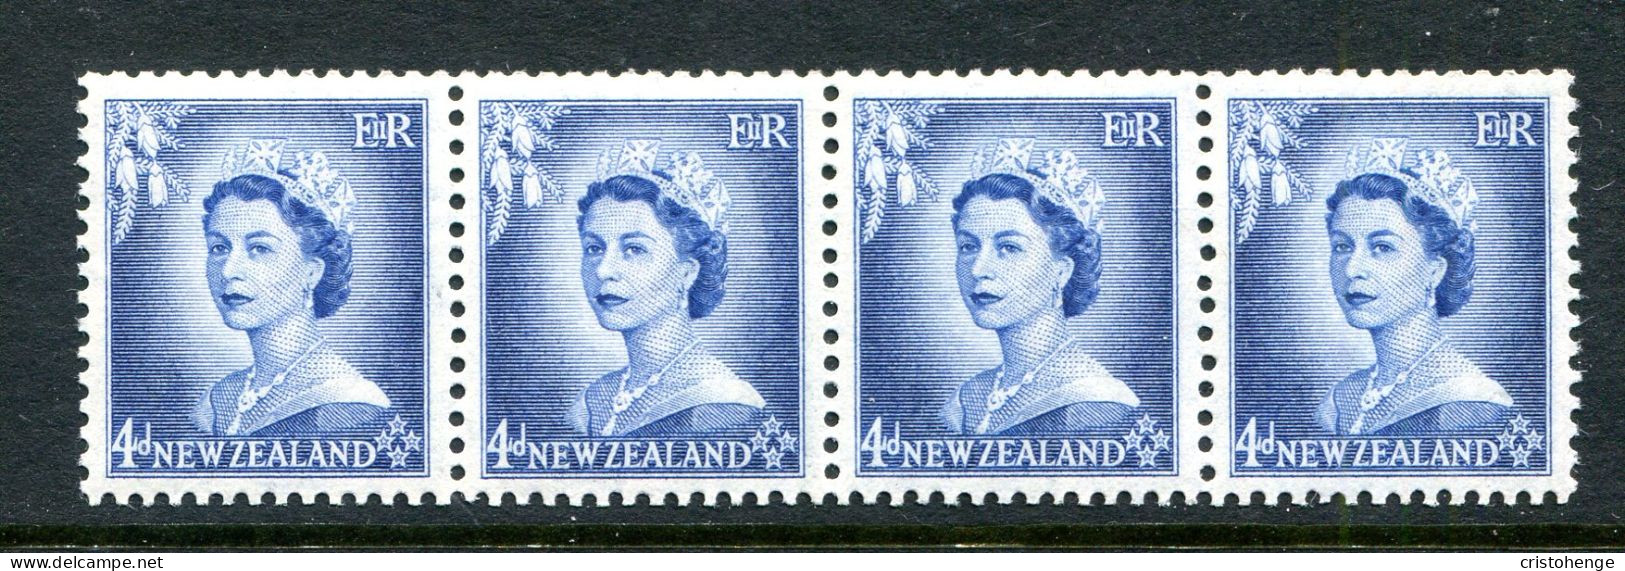 New Zealand 1953-59 QEII Definitives - Coil Strip - 4d Blue - Strip Of 4 MNH (SG Unlisted) - Unused Stamps